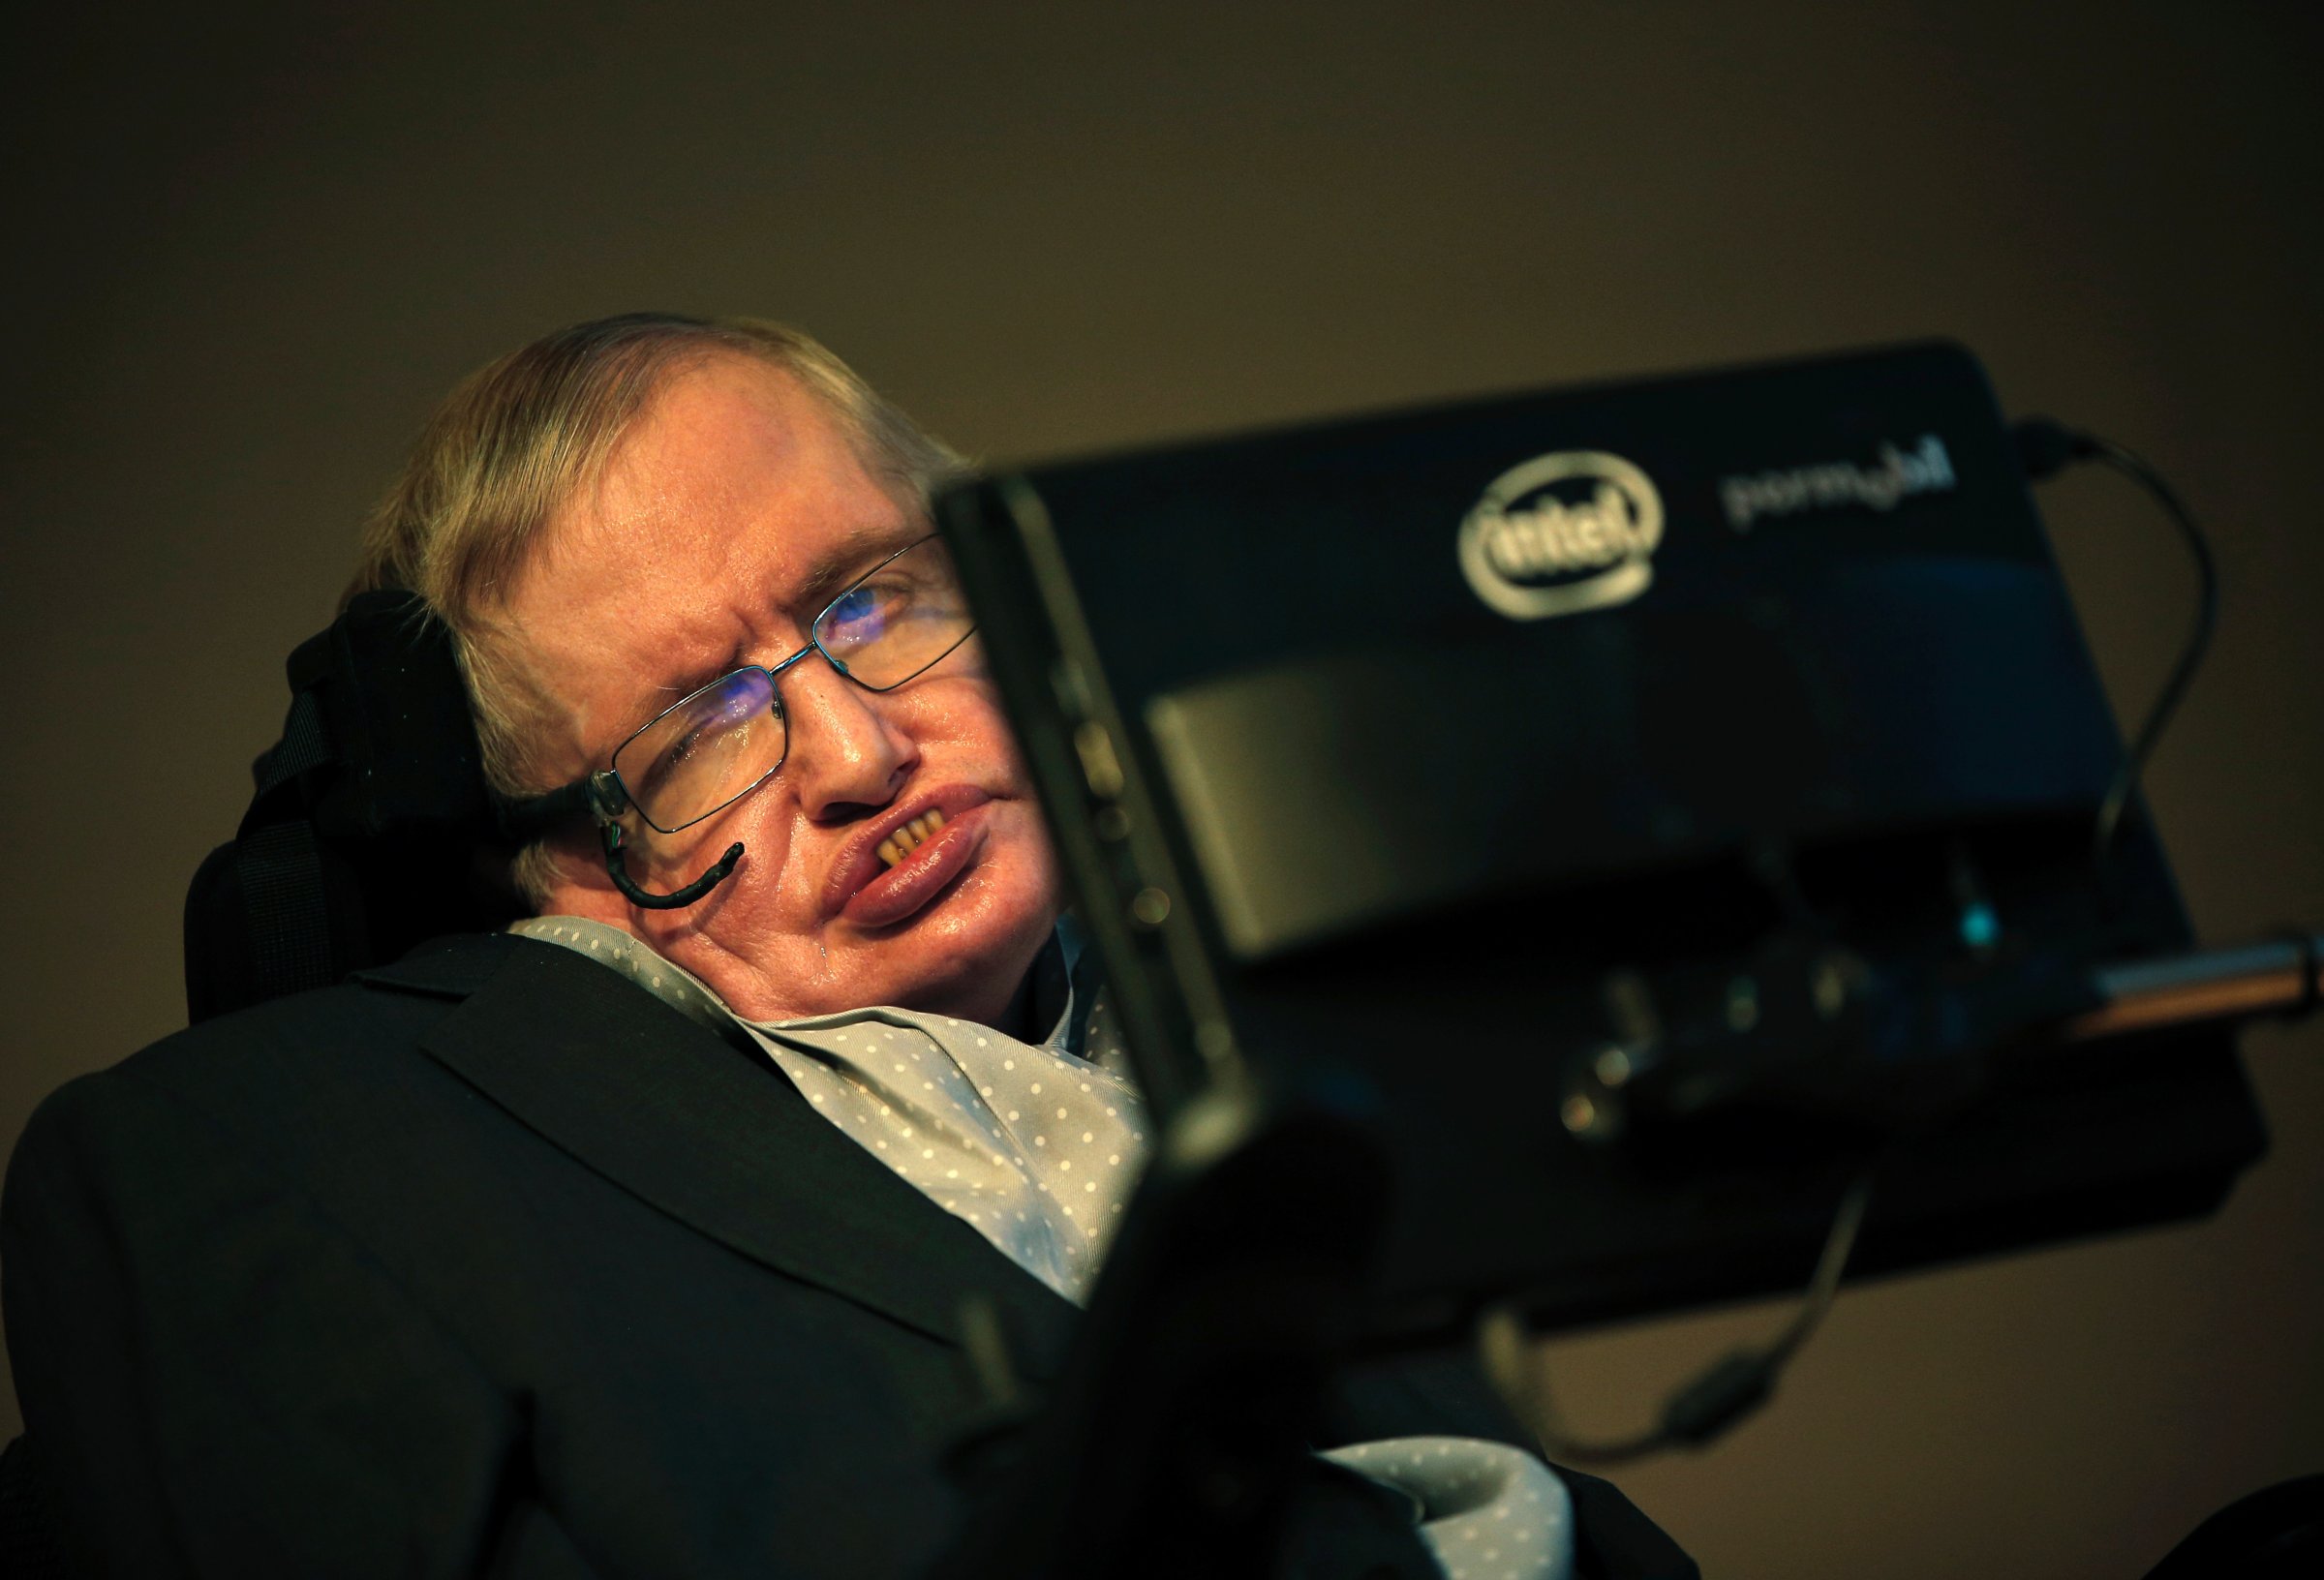 Professor Stephen Hawking attends a press conference to announce a new award for science communication in London on December 16, 2015.